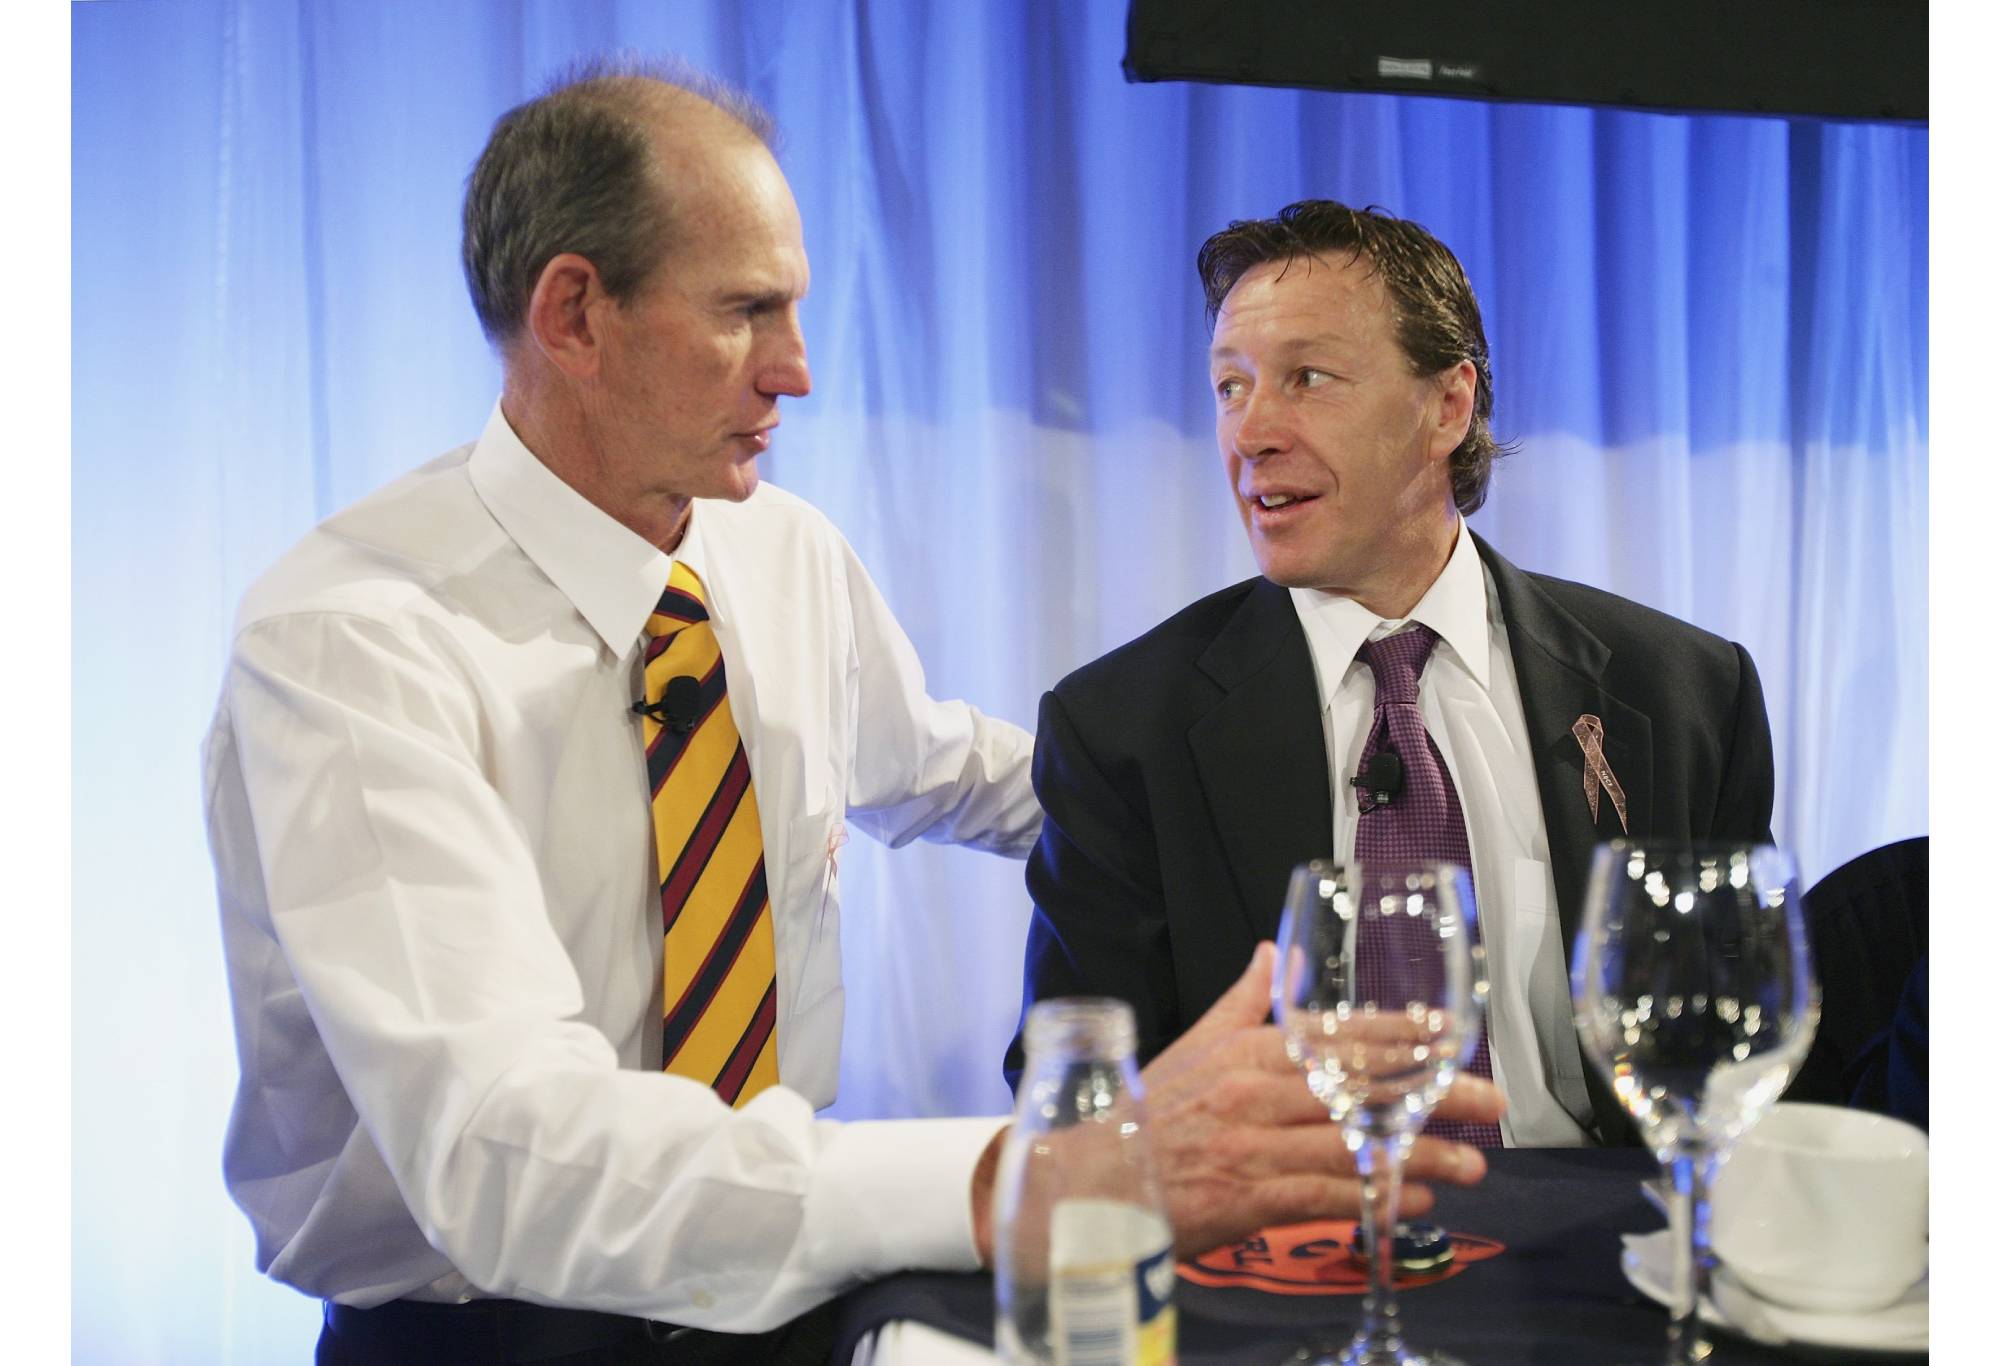 SYDNEY, AUSTRALIA - SEPTEMBER 28: Brisbane Broncos Coach Wayne Bennett and Melbourne Storm Coach Craig Bellamy talk to each other during the NRL Captains Grand Final Breakfast at the Westin Hotel September 28, 2006 in Sydney, Australia. (Photo by Cameron Spencer/Getty Images)